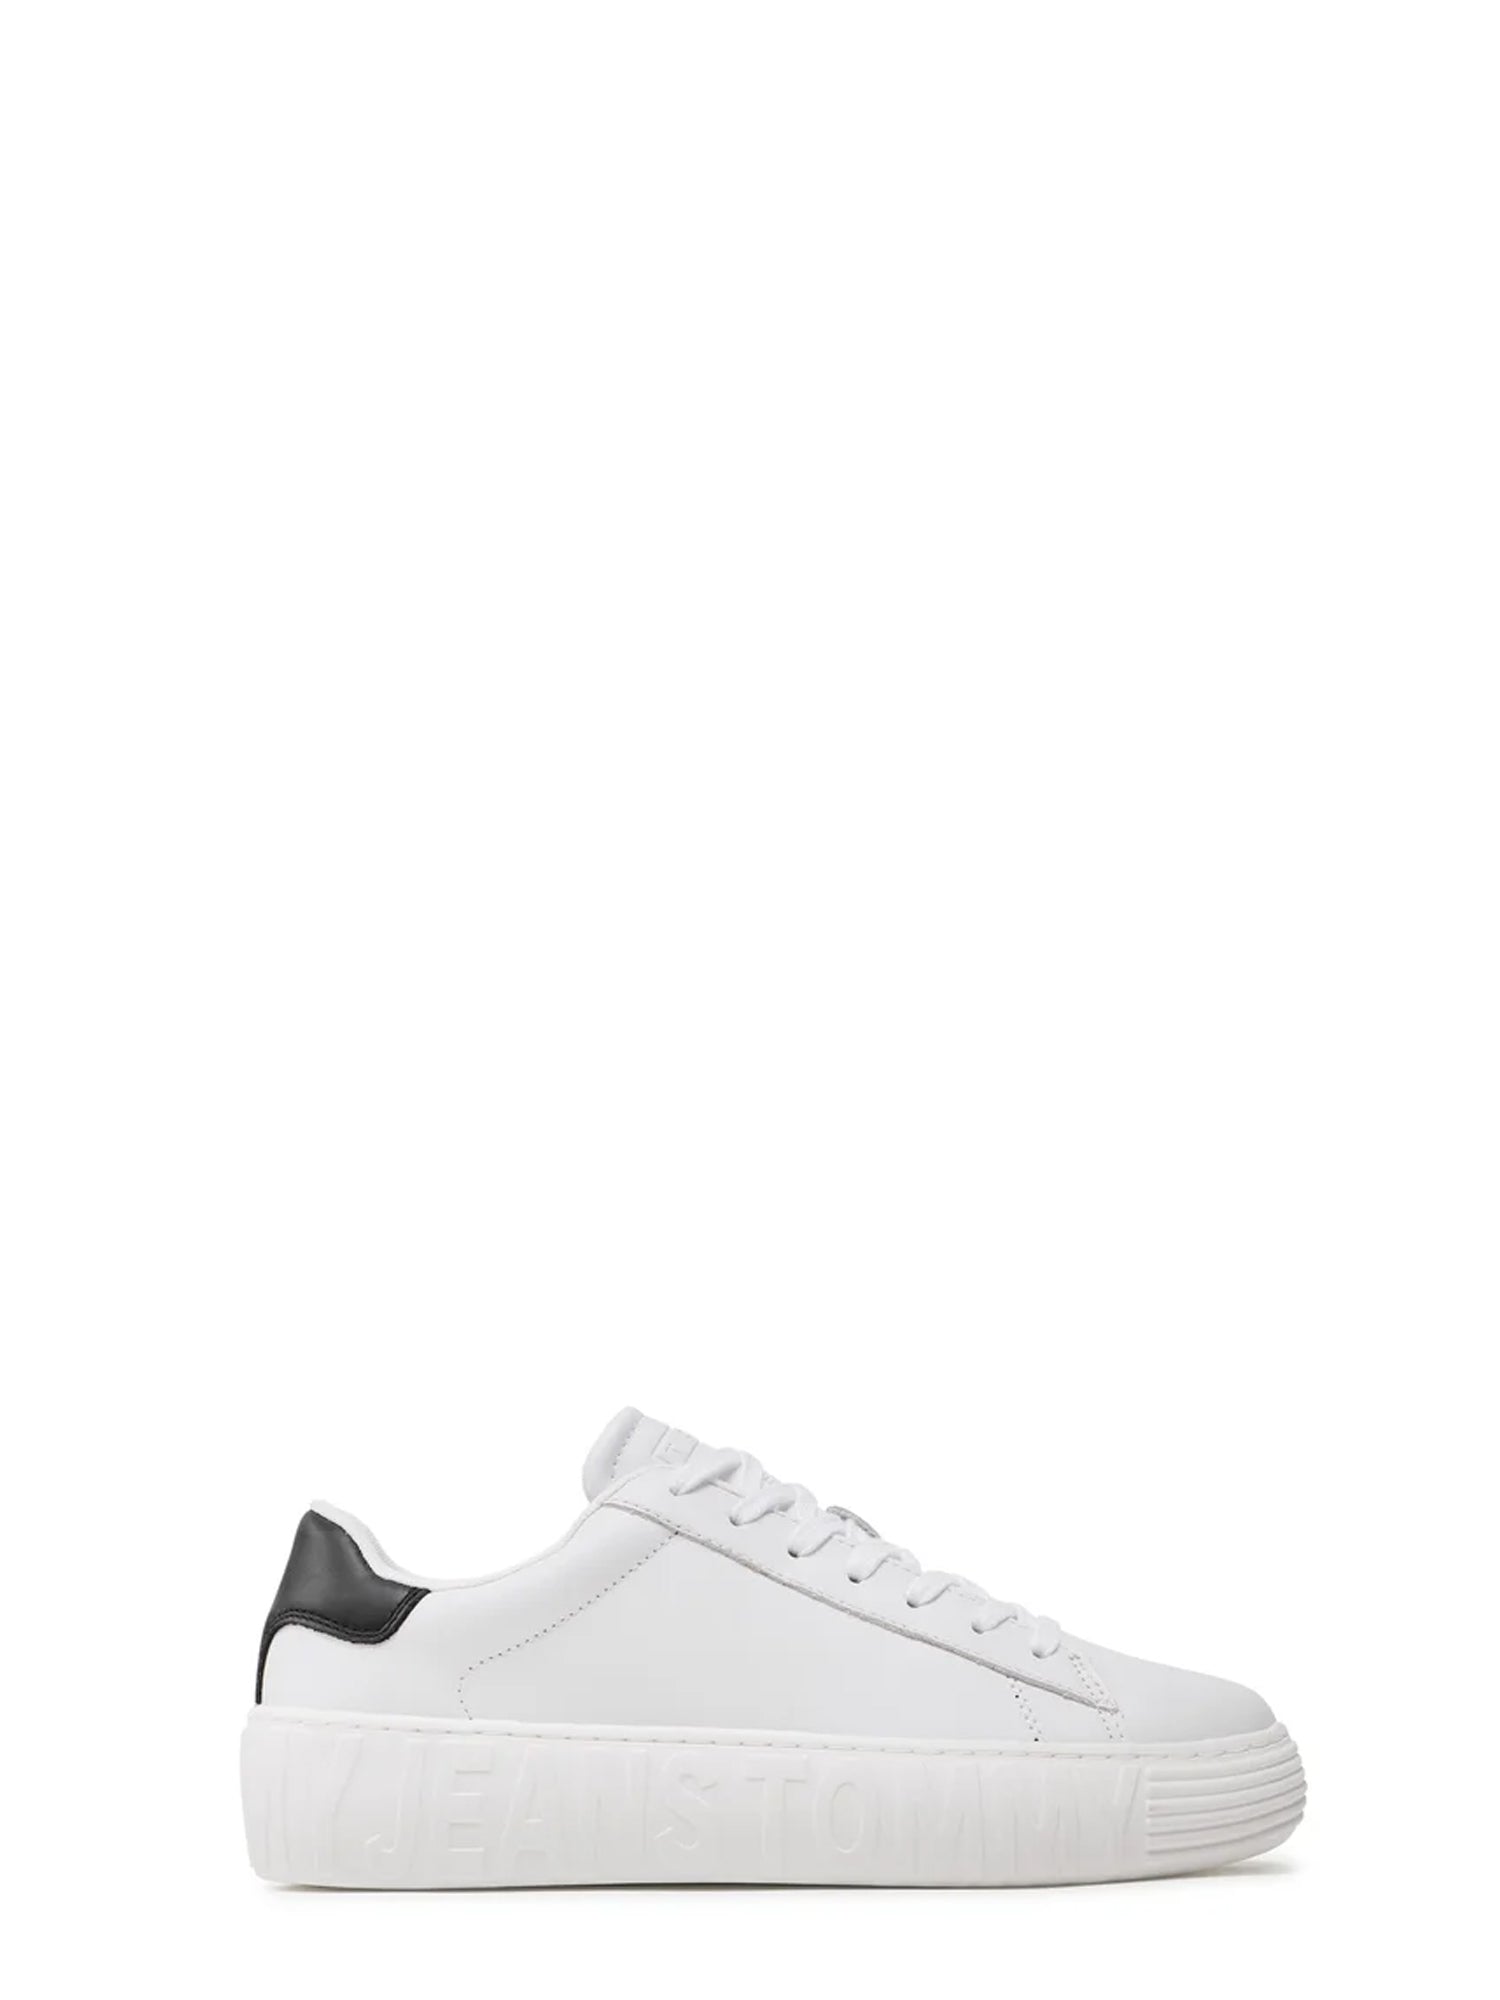 TOMMY HILFIGER SHOES SNEAKERS IN PELLE ESSENTIAL BIANCO